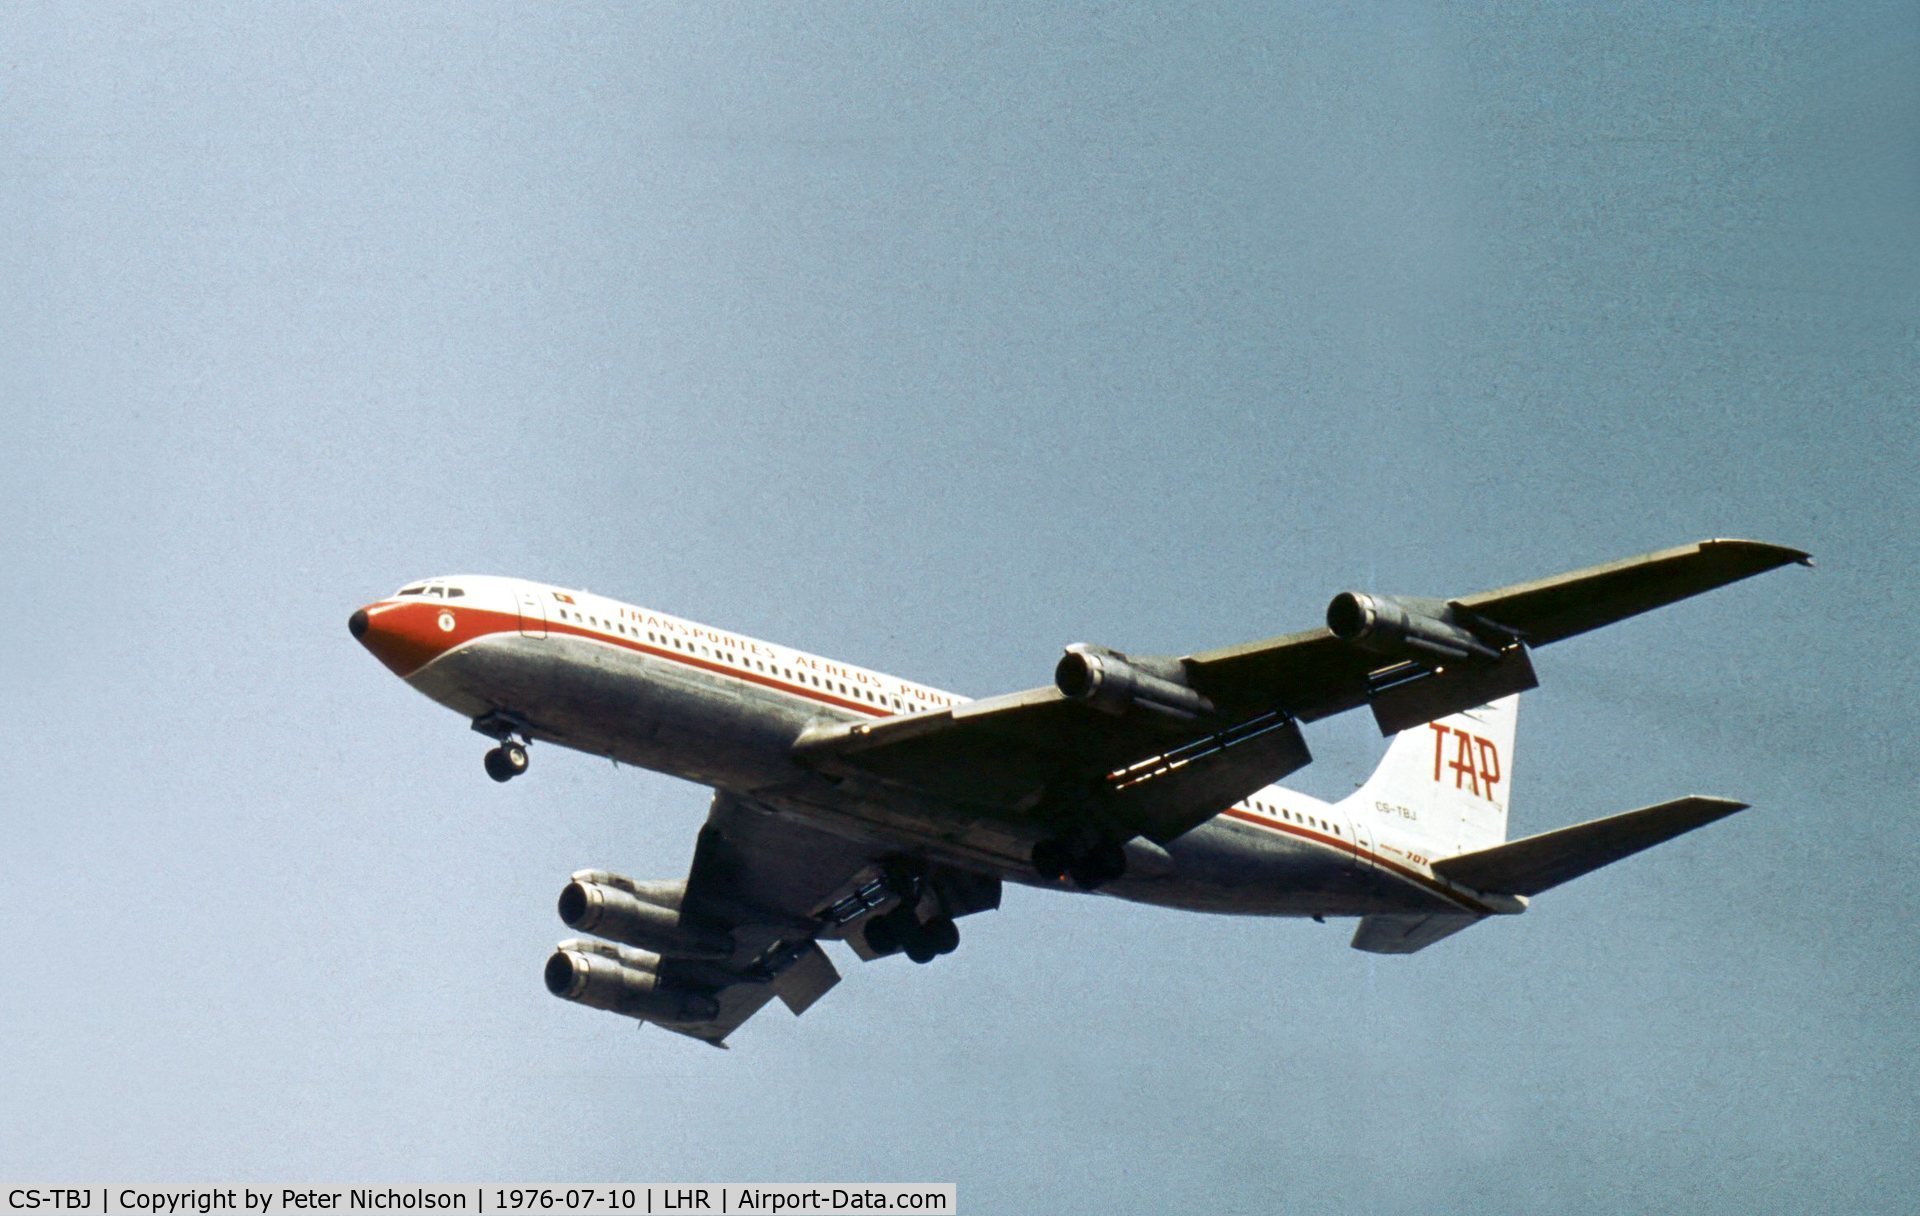 CS-TBJ, 1966 Boeing 707-373C C/N 19179, Boeing 707-373C of Portuguese airline TAP on final approach to London Heathrow in the Summer of 1976.